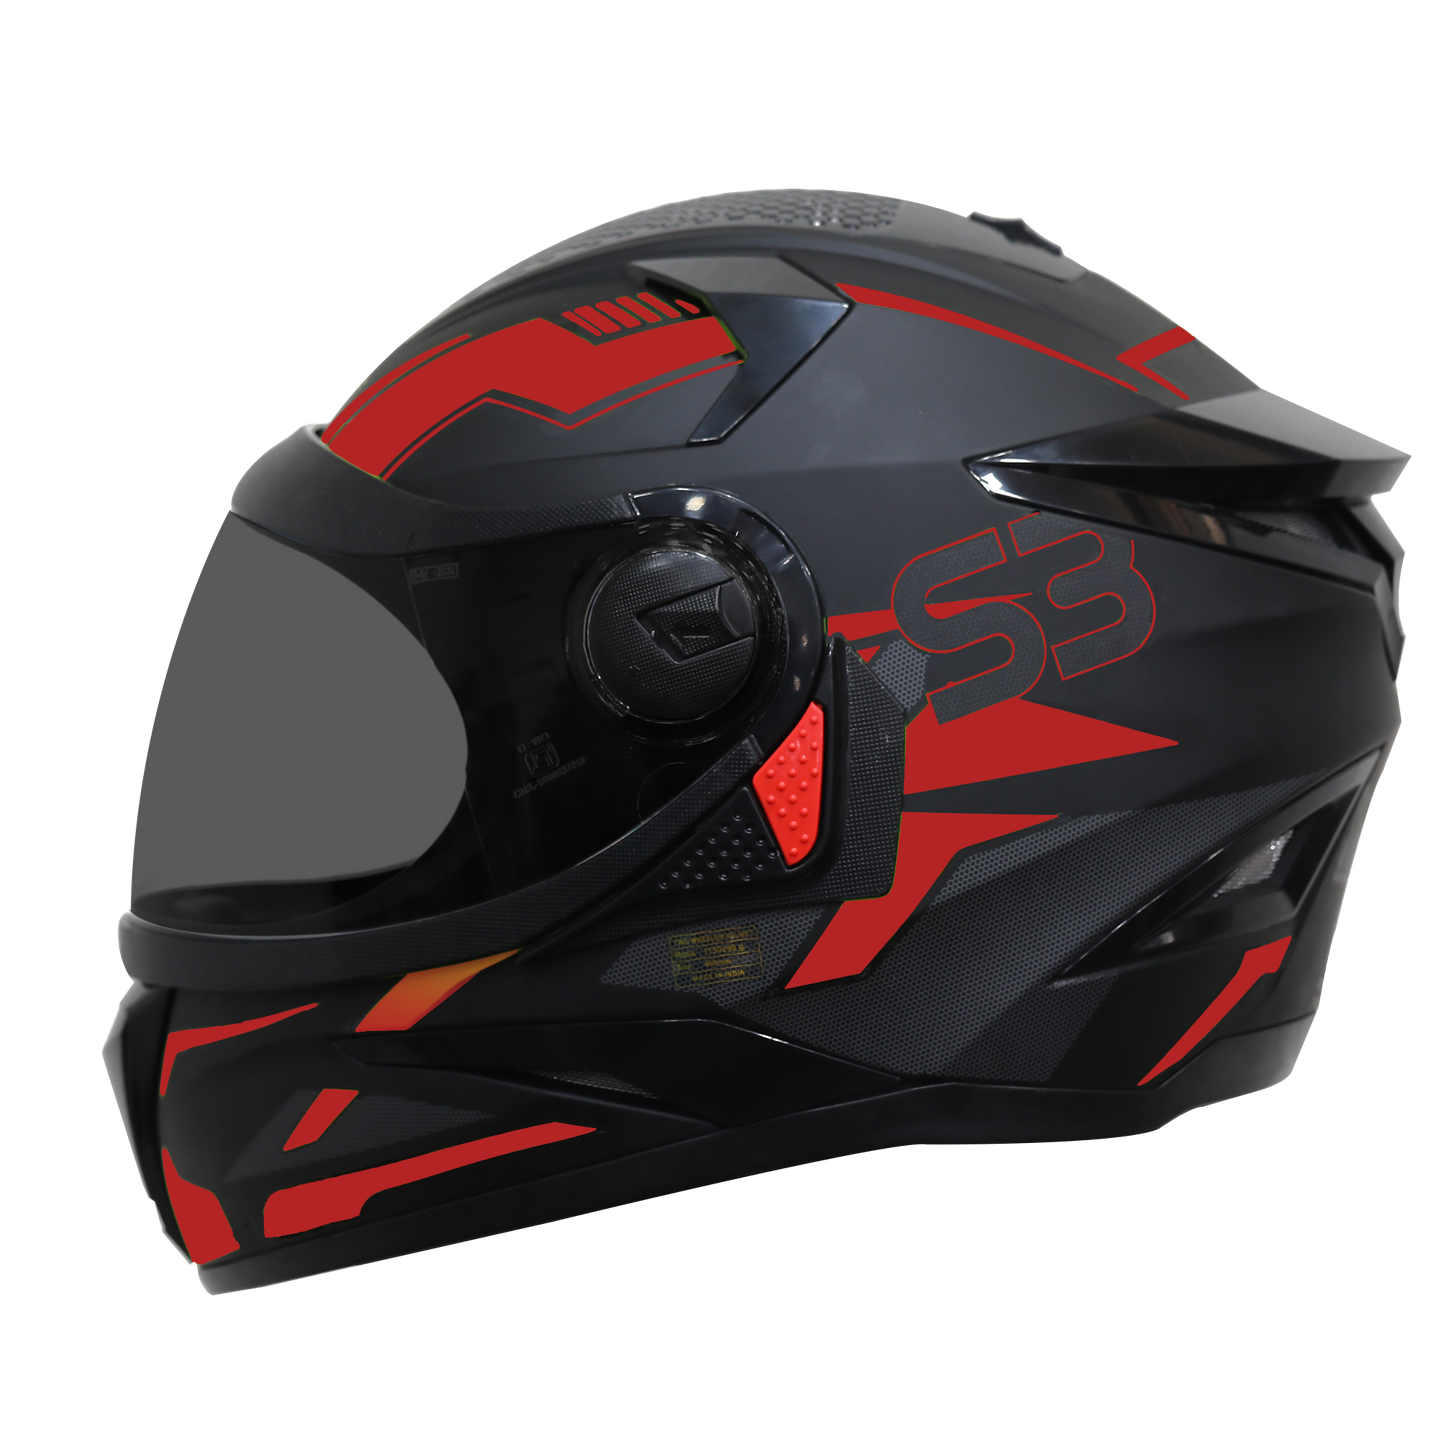 Steelbird SBH-17 Terminator ISI Certified Full Face Graphic Helmet for Men and Women (Matt Black Red Fitted with Clear Visor and Extra Smoke Visor)